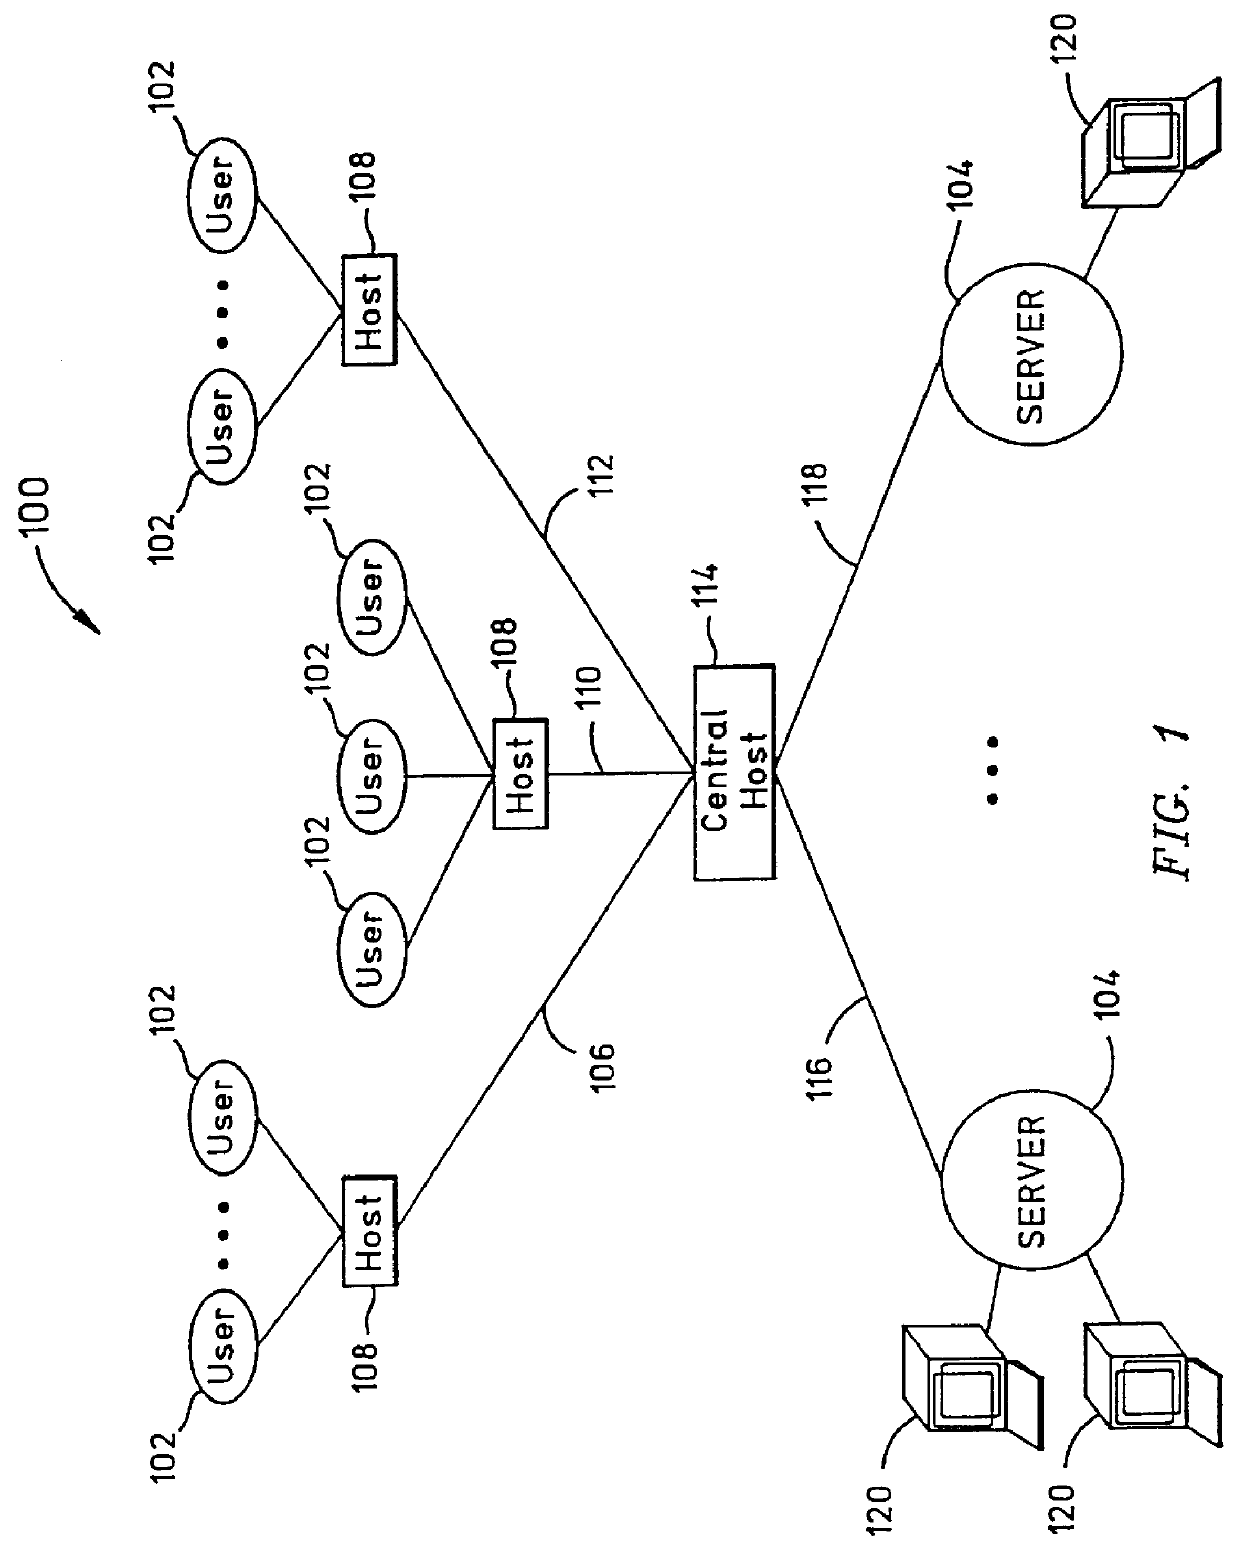 Method and apparatus for efficient profile matching in a large scale webcasting system